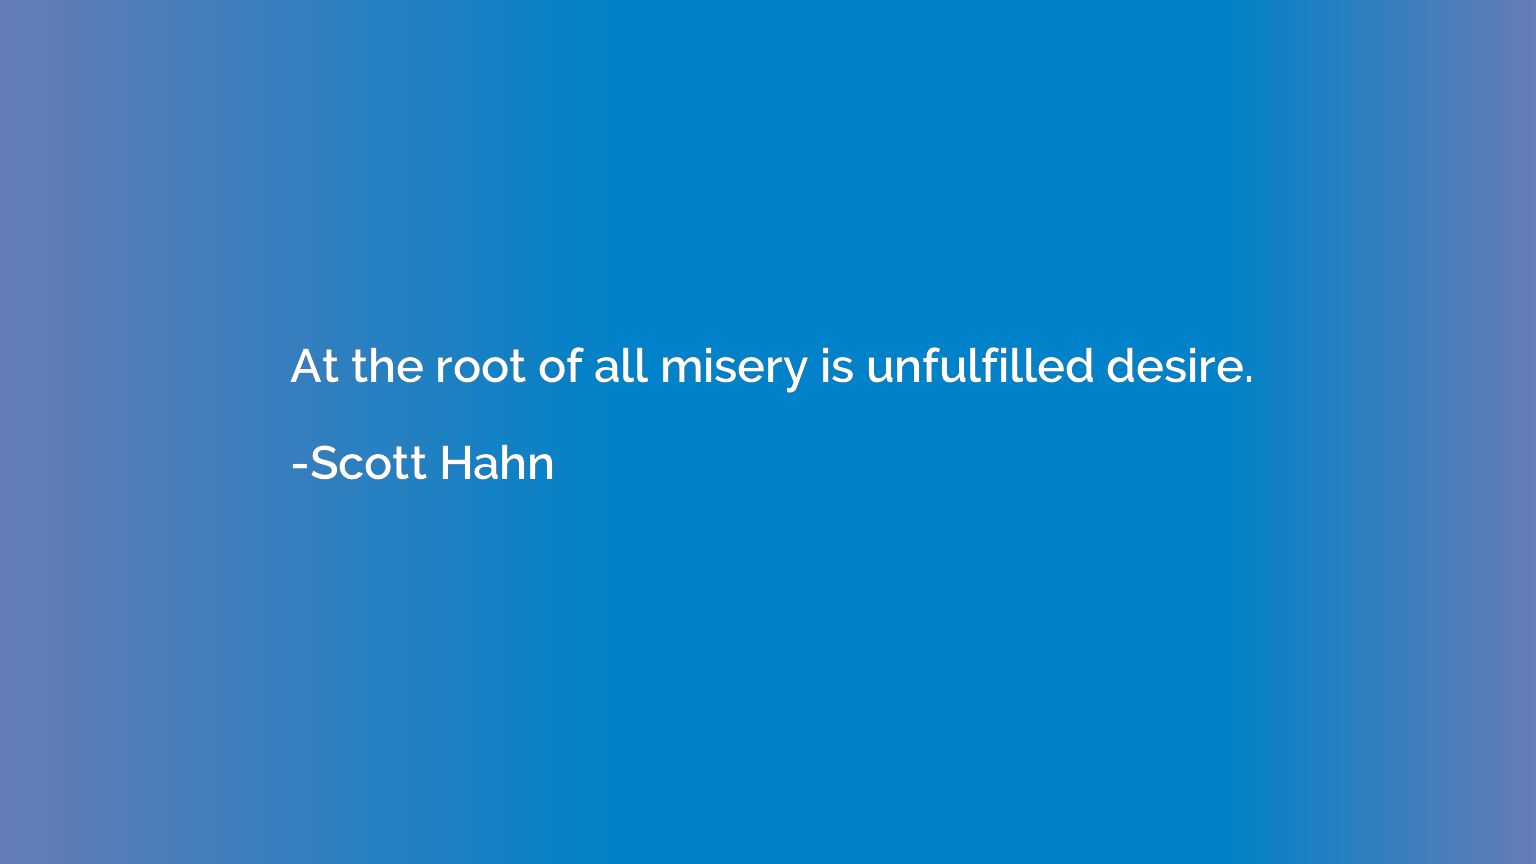 At the root of all misery is unfulfilled desire.